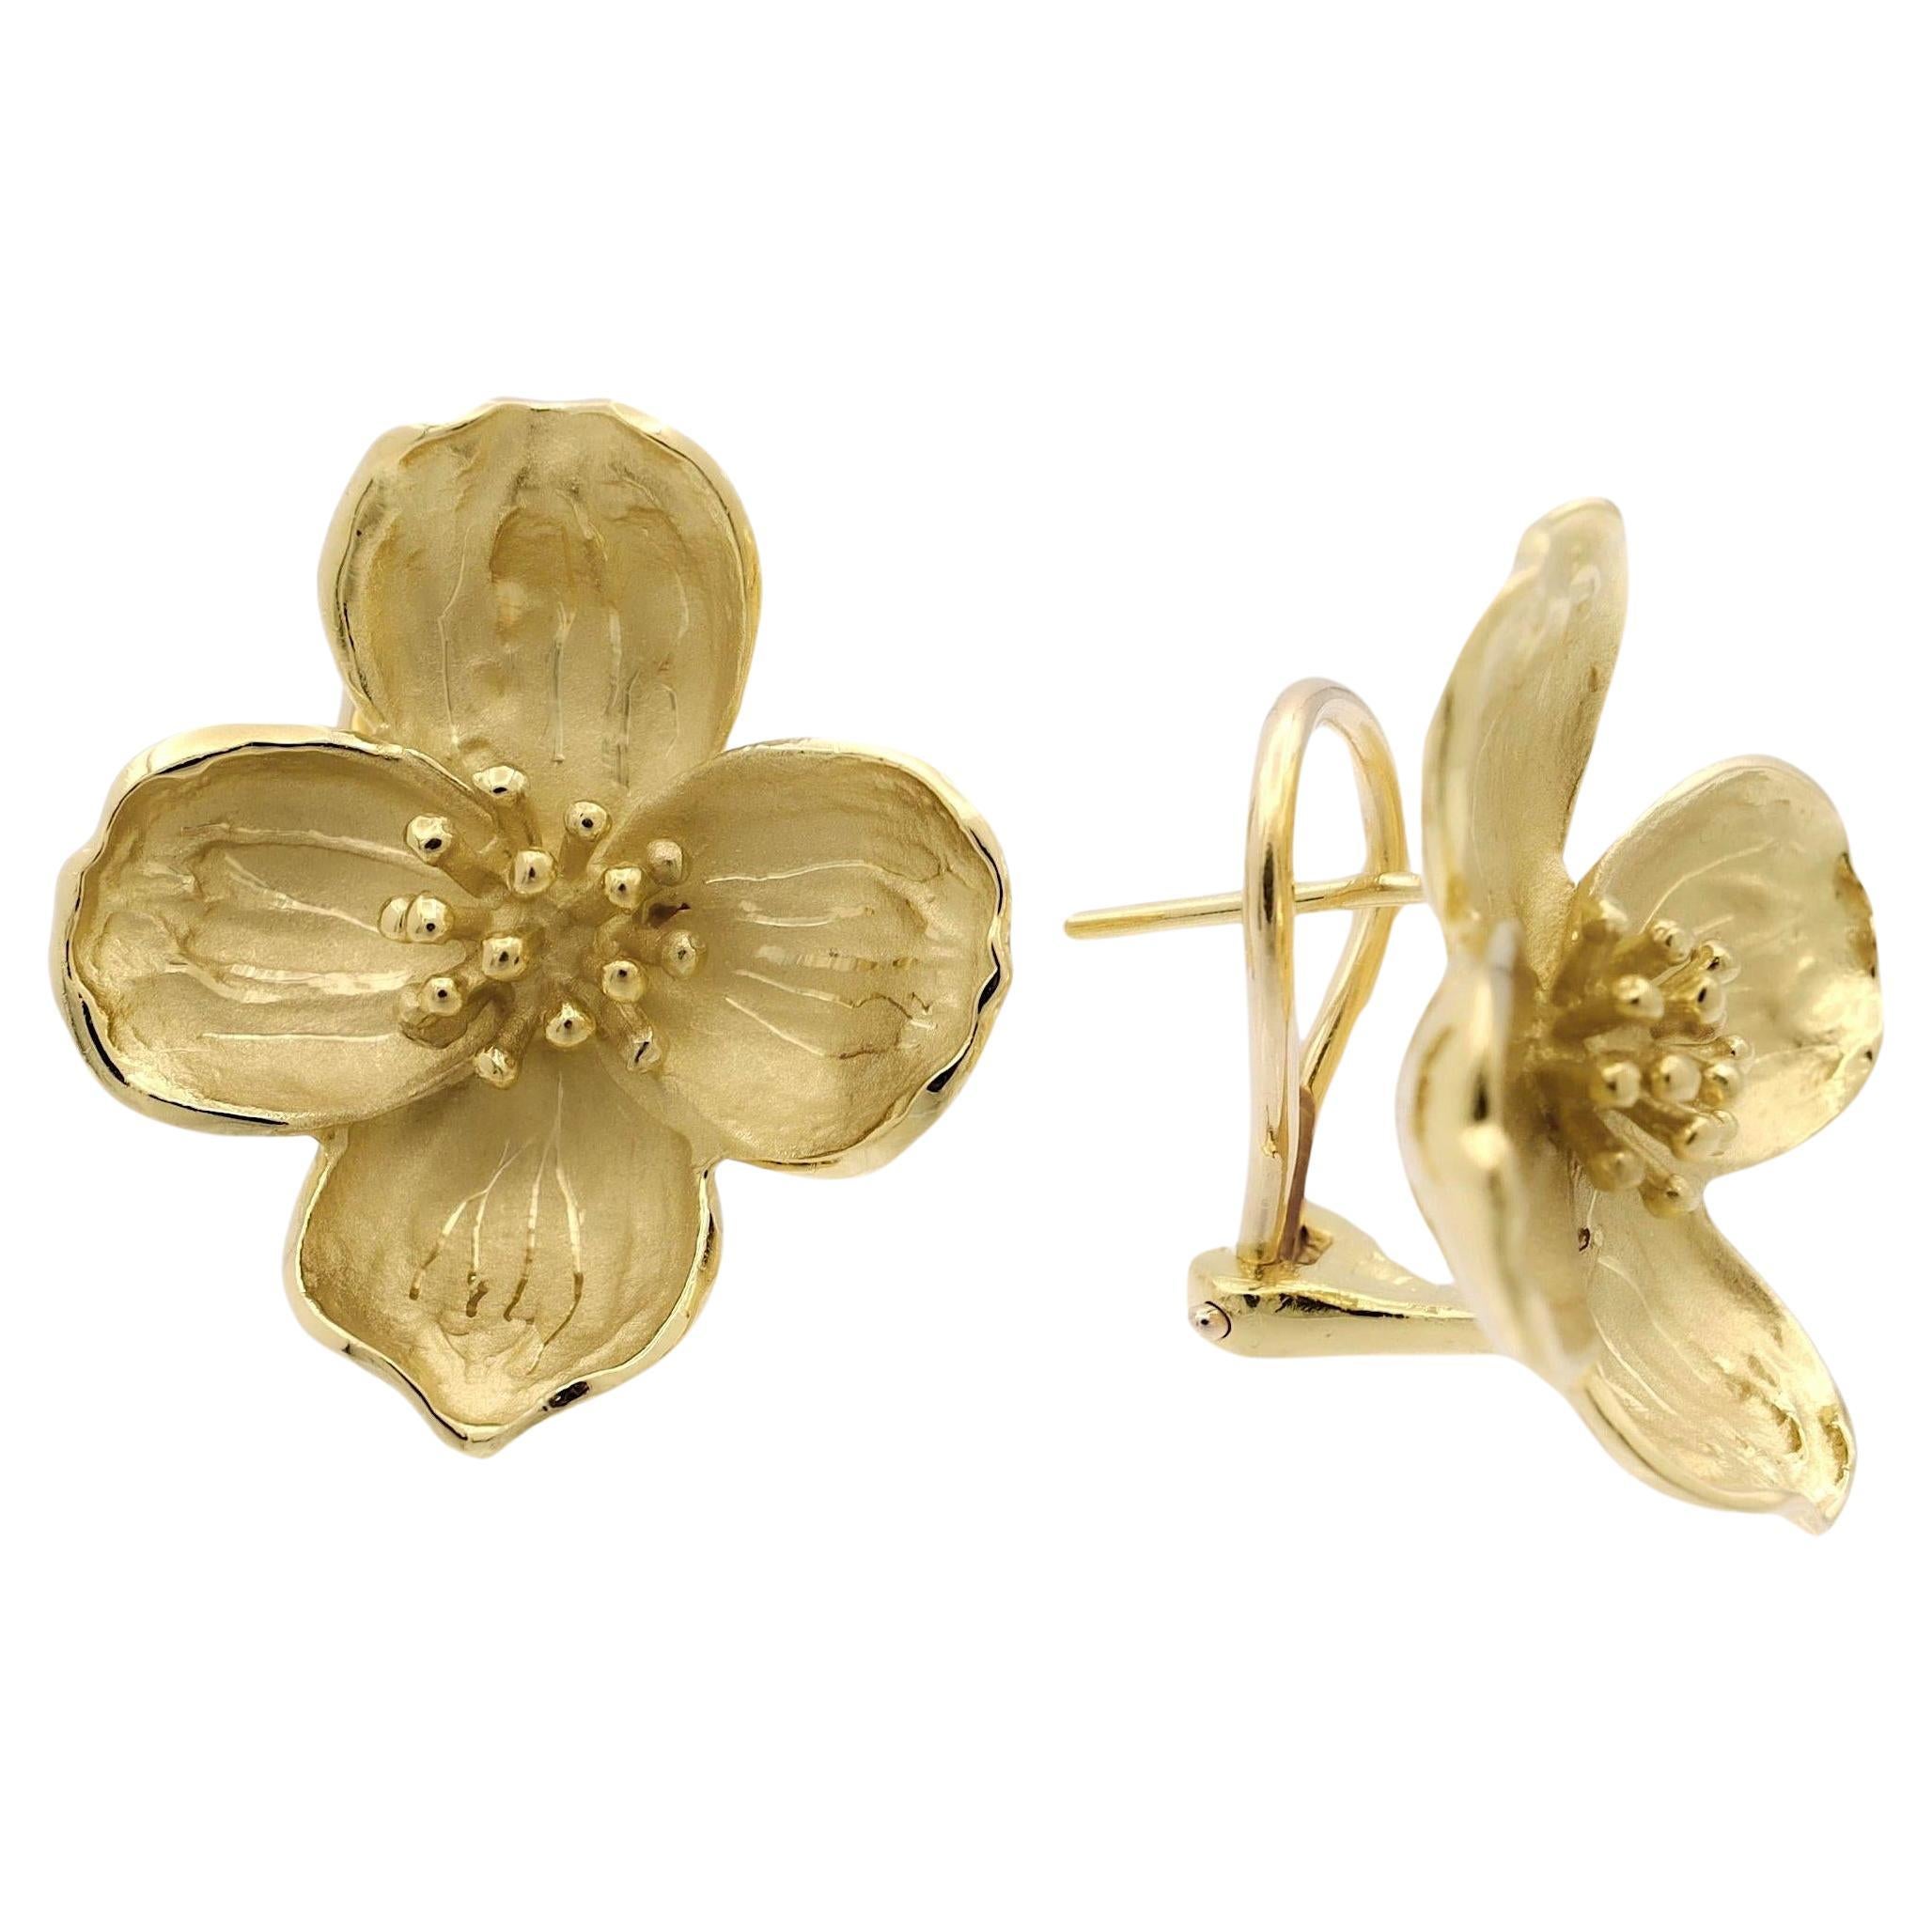 Vintage Dogwood Floral earrings, meticulously crafted in lustrous 18 karat yellow gold. These exquisite earrings showcase the delicate beauty of dogwood flowers, capturing their essence in intricate detailing. The interior boasts a satin finish,